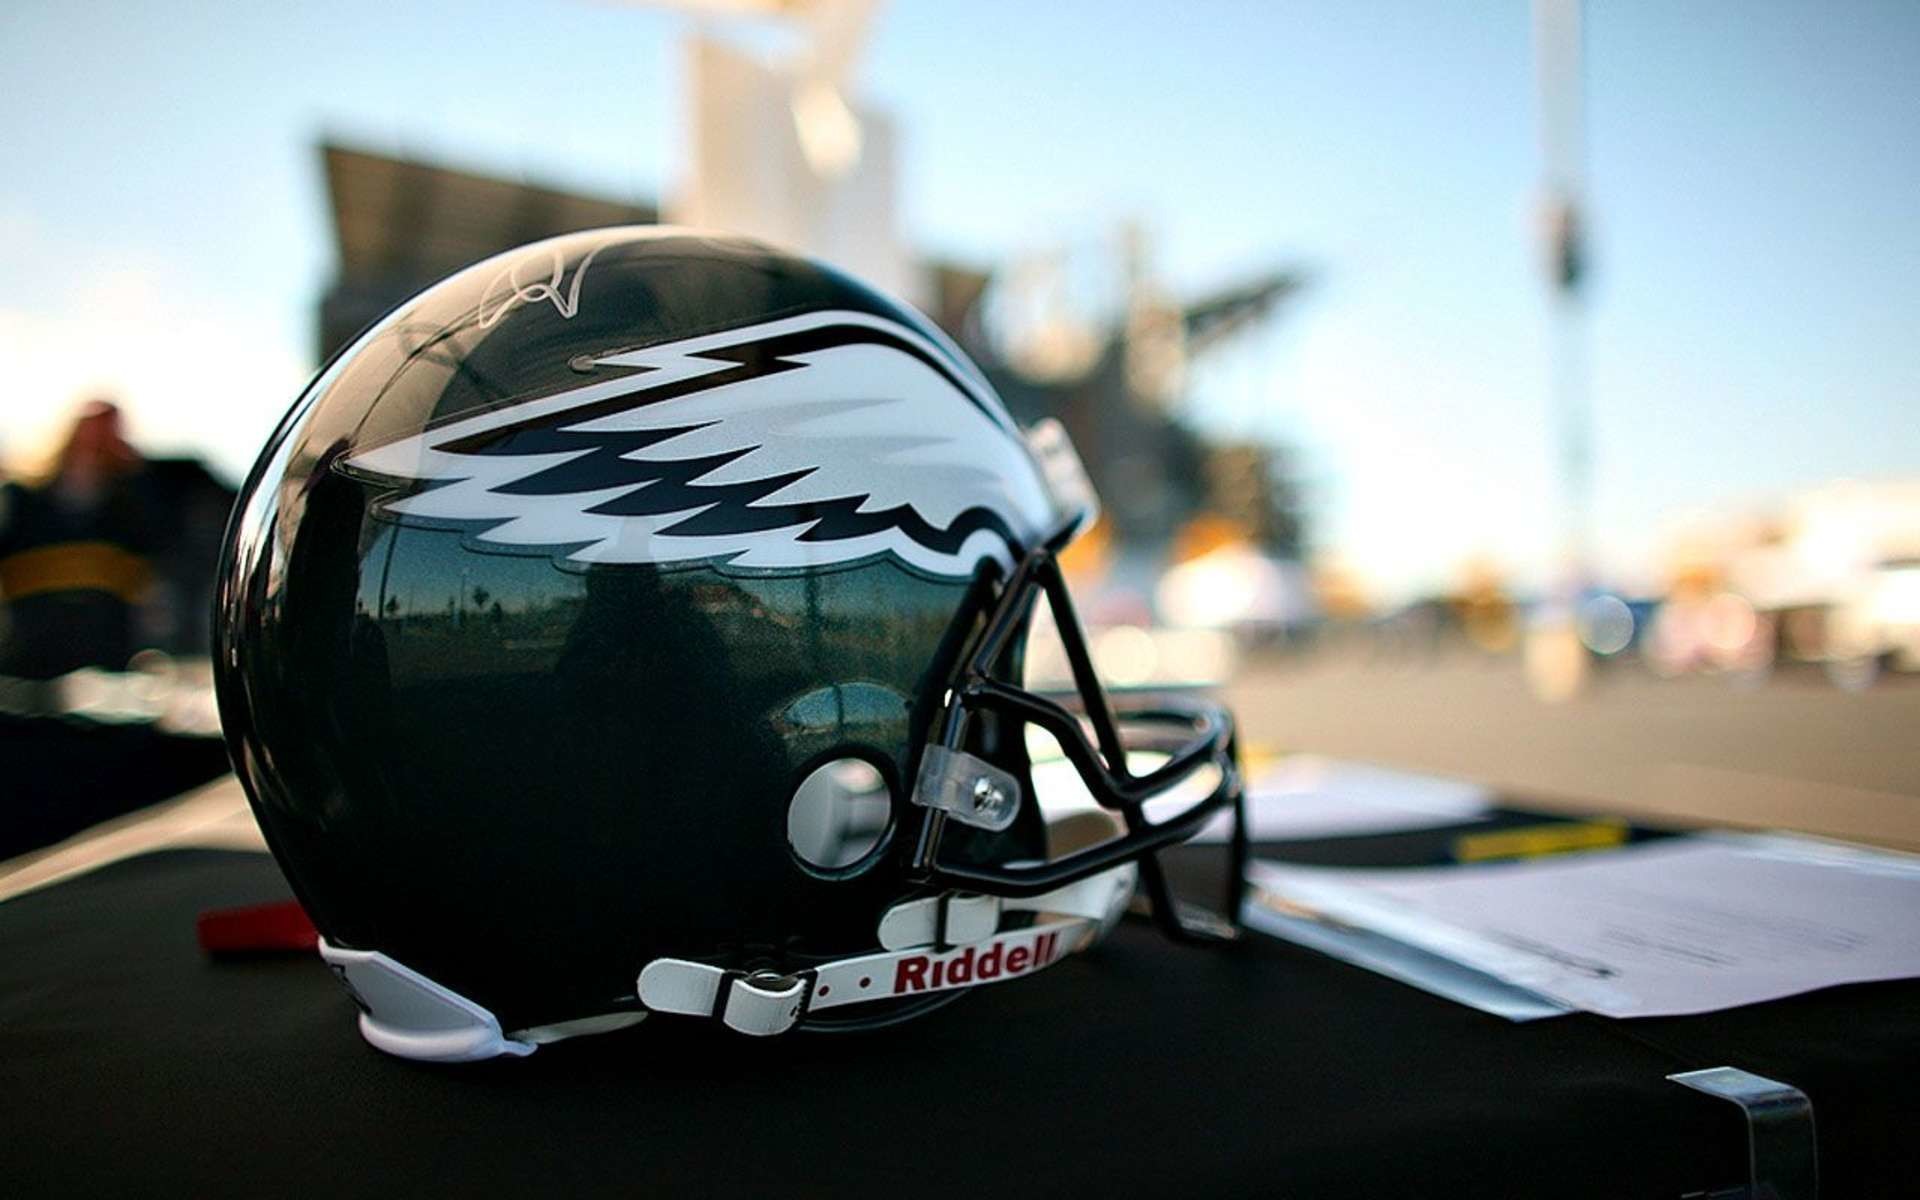 1920x1200 Philadelphia Eagles Backgrounds | Wallpapers, Backgrounds, Images .